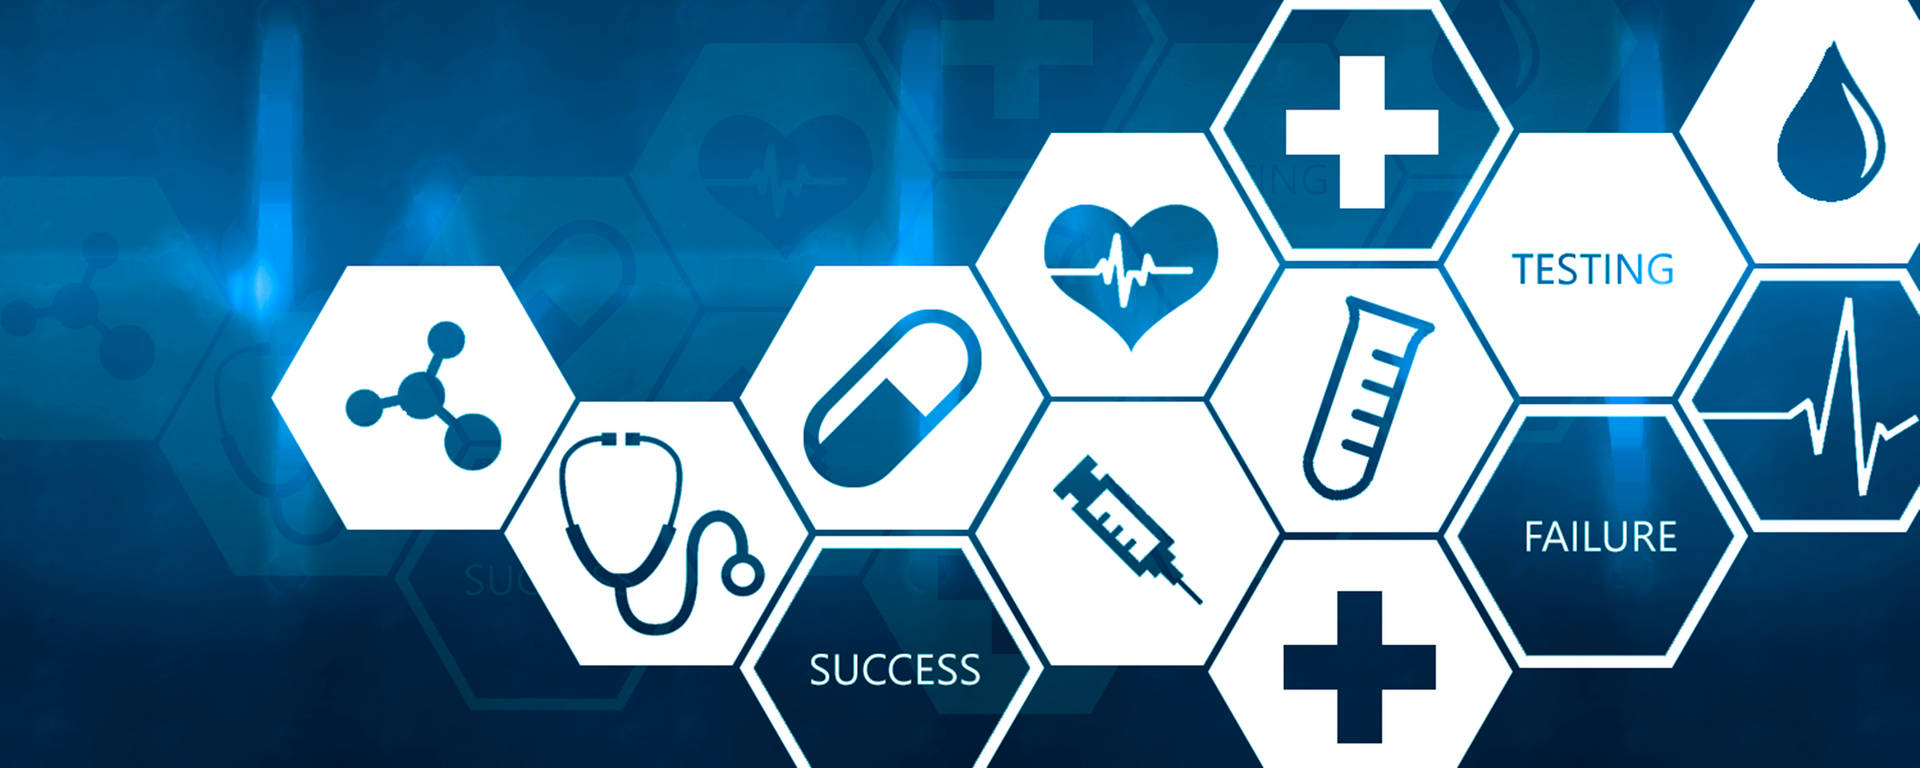 The Dilemma of Healthcare Success and Failure Wallpaper